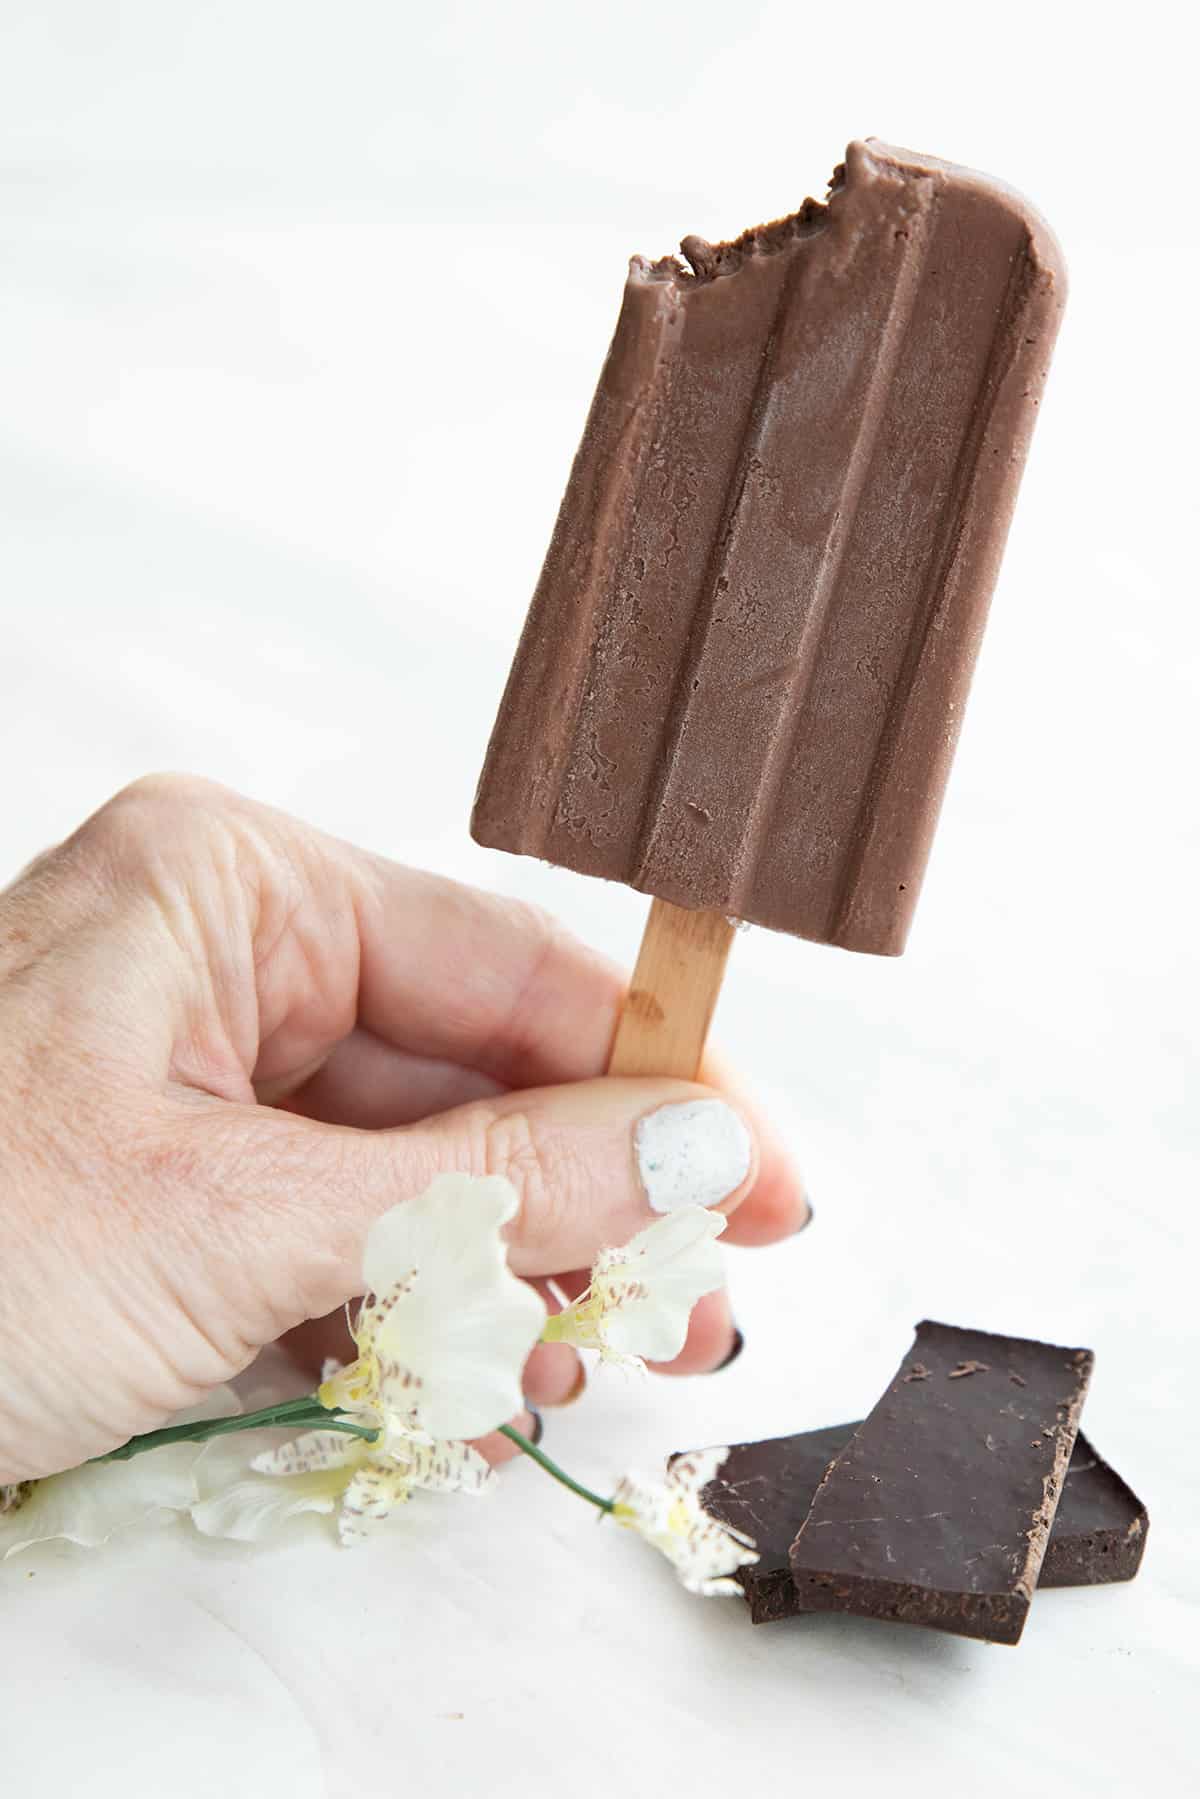 A hand holding up a sugar free fudgesicle with a bite taken out of the corner.